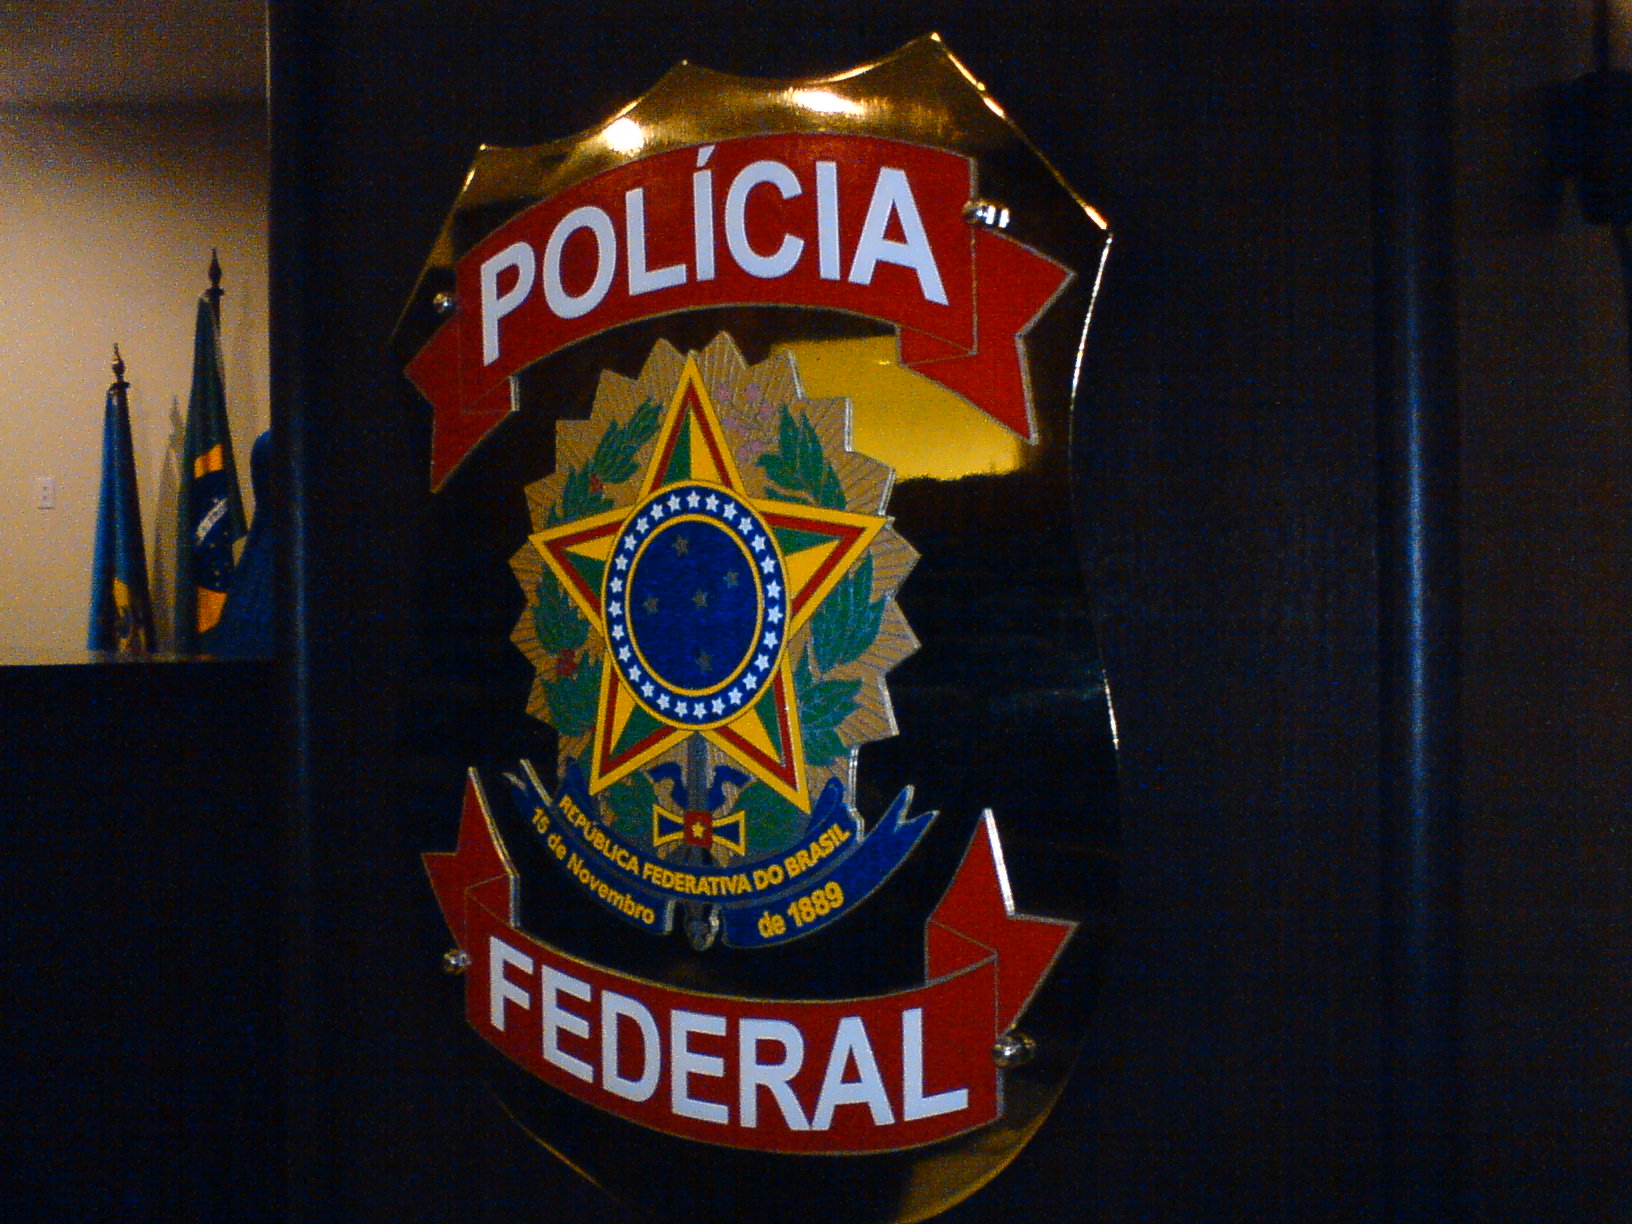 http://upload.wikimedia.org/wikipedia/commons/6/6a/Brasao_Policia_Federal_auditorio_RN.jpg